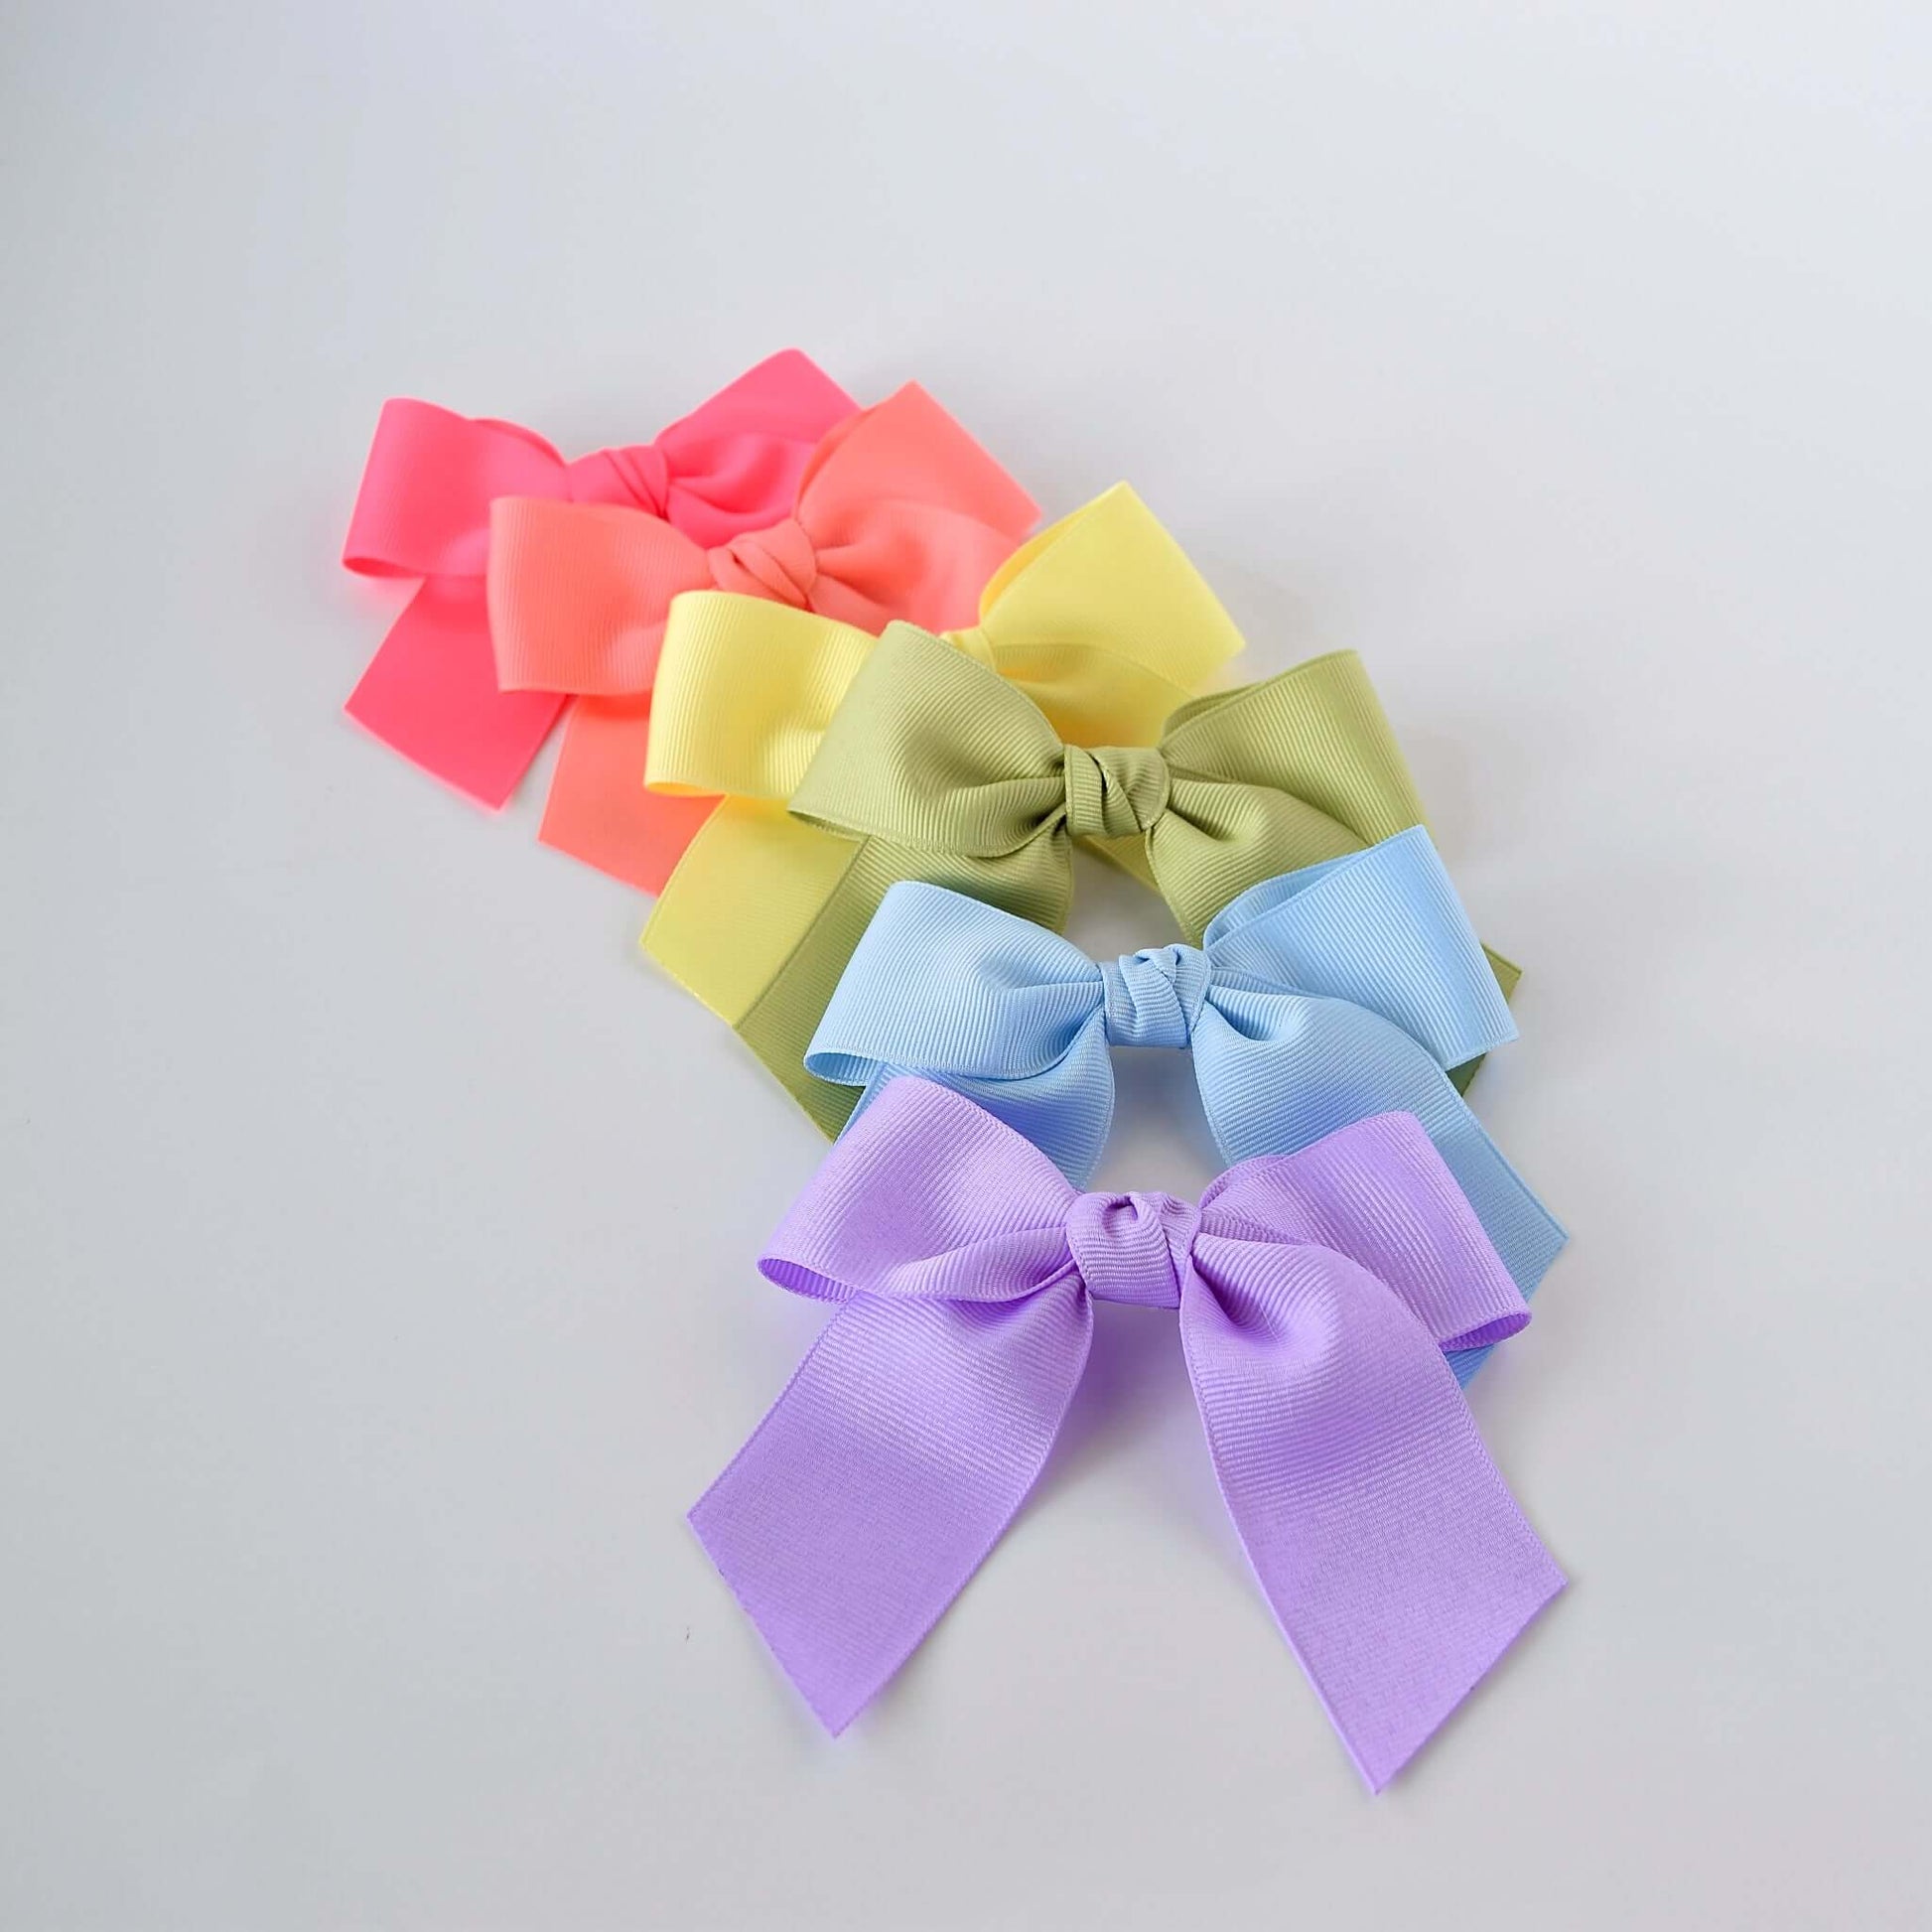 Colorful 4 inch grosgrain Sailor hair bows in pastel shades of pink, coral, yellow, green, blue, and lavender, arranged in a row.